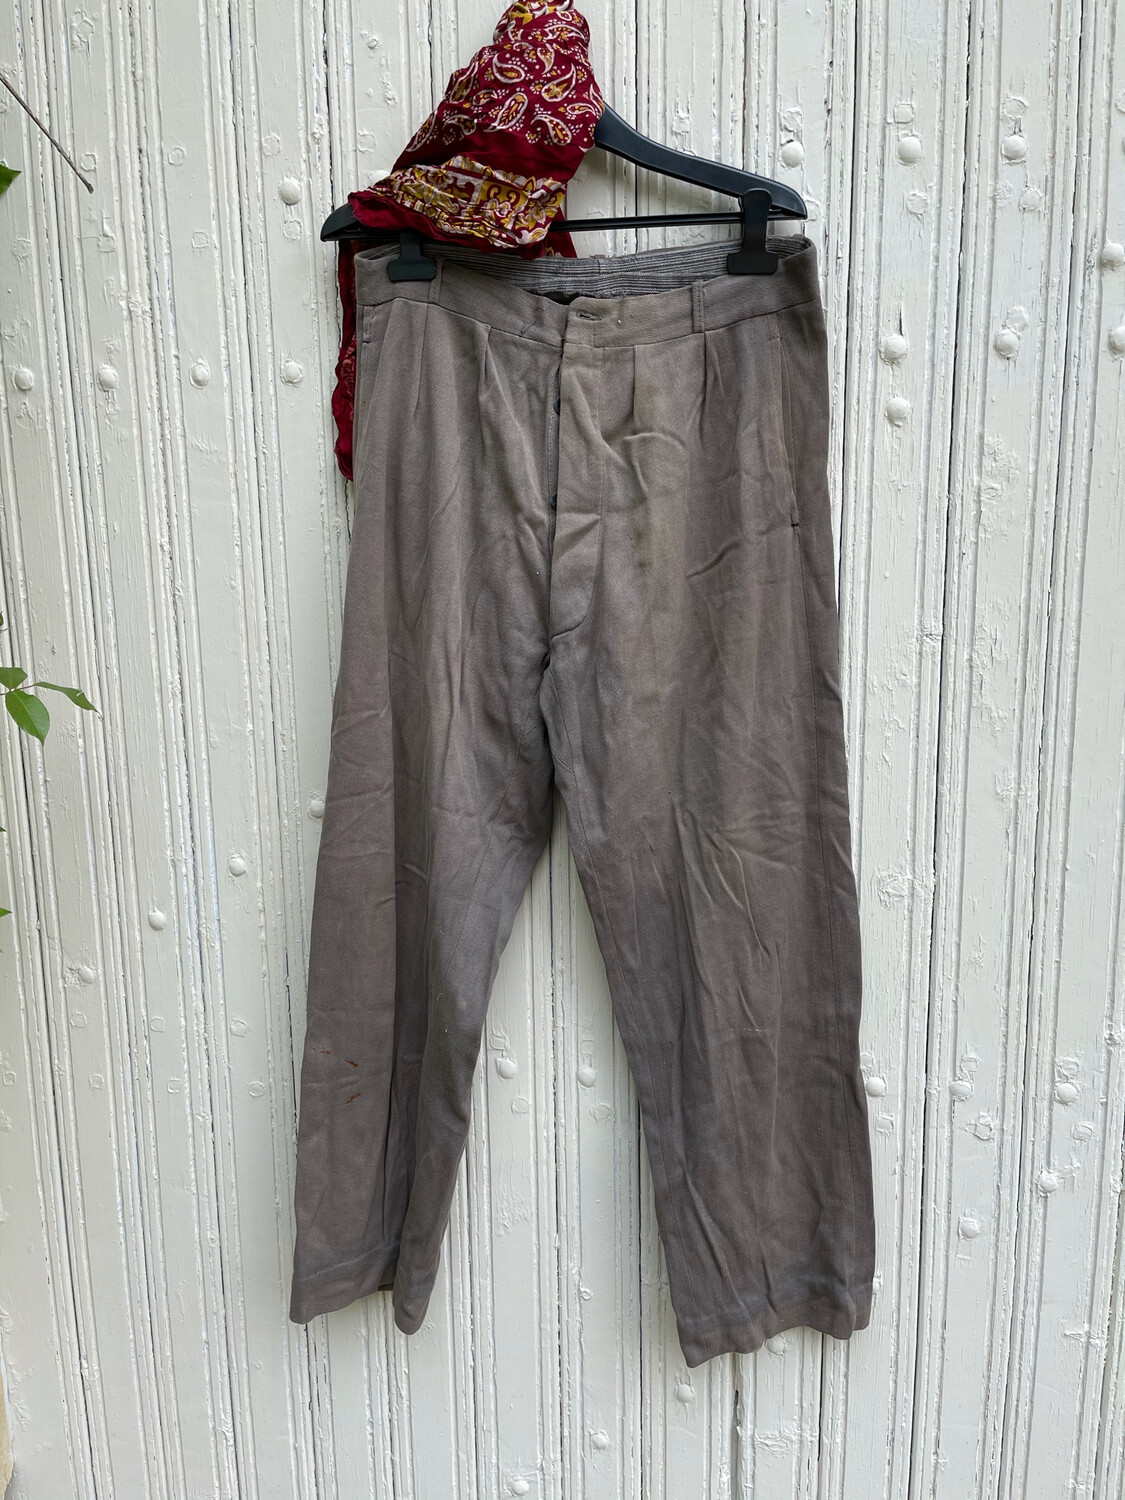 Old French Mens work Trousers